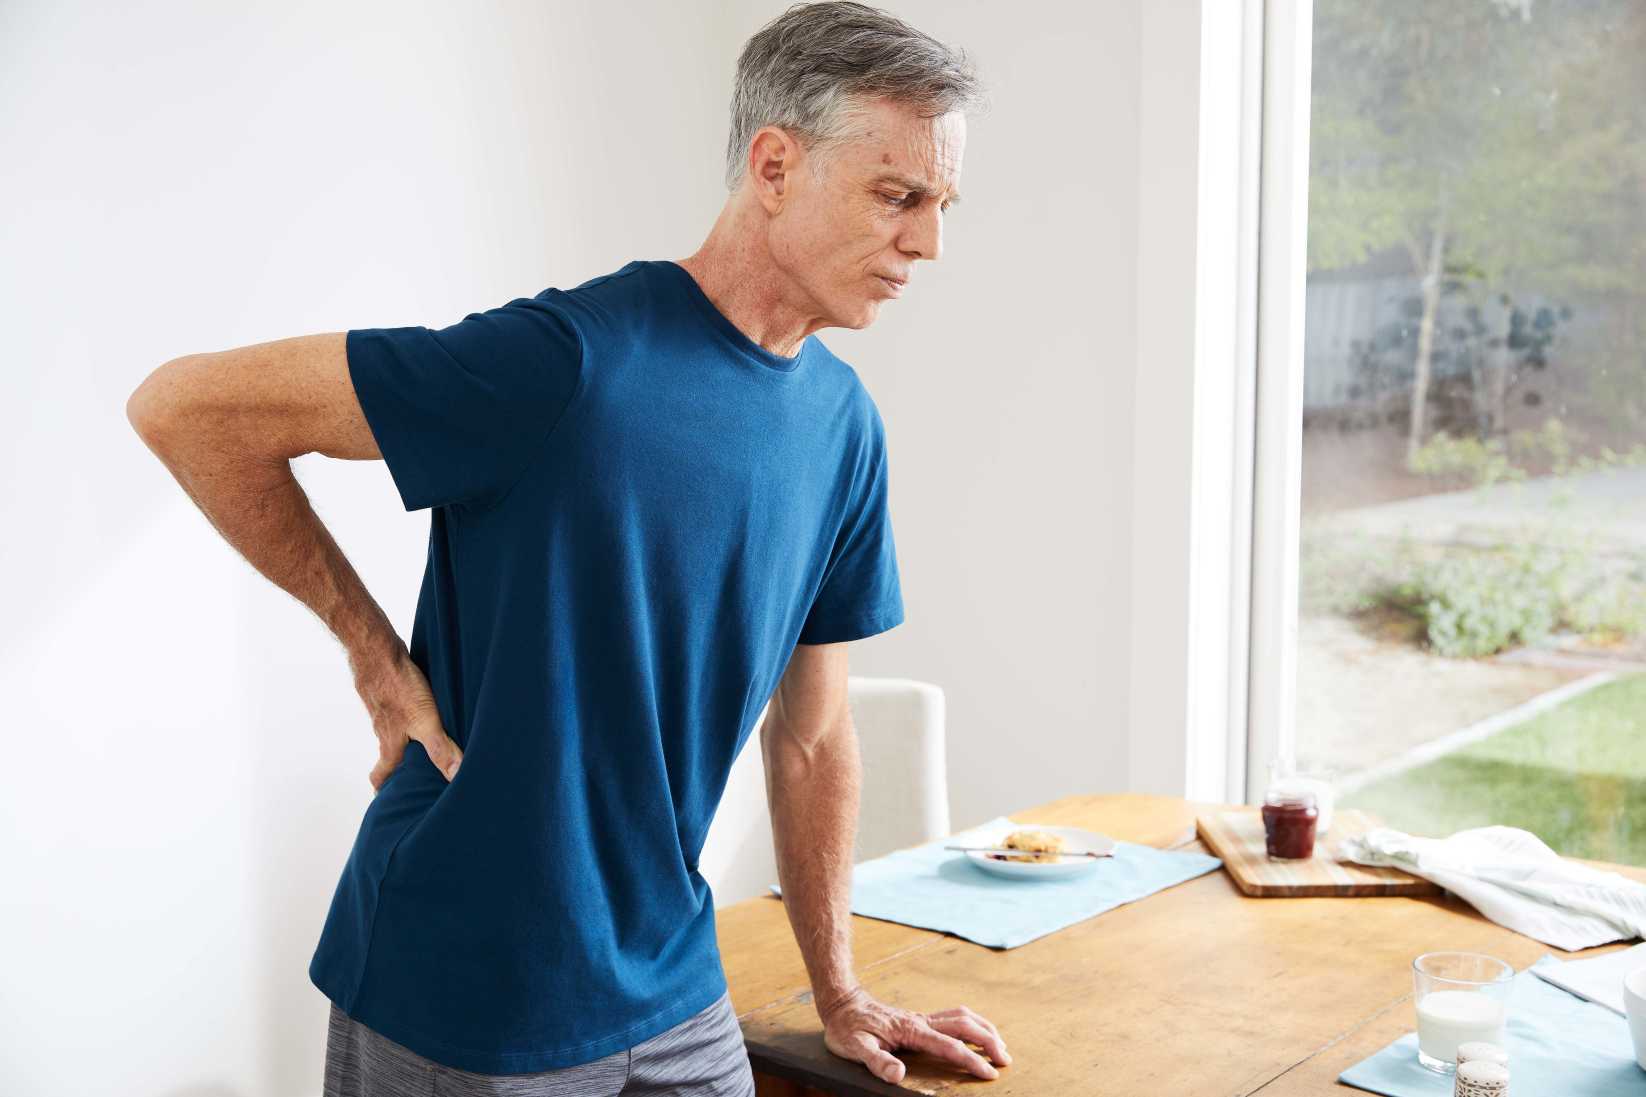 How to Treat Your Lower Back and Hip Pain